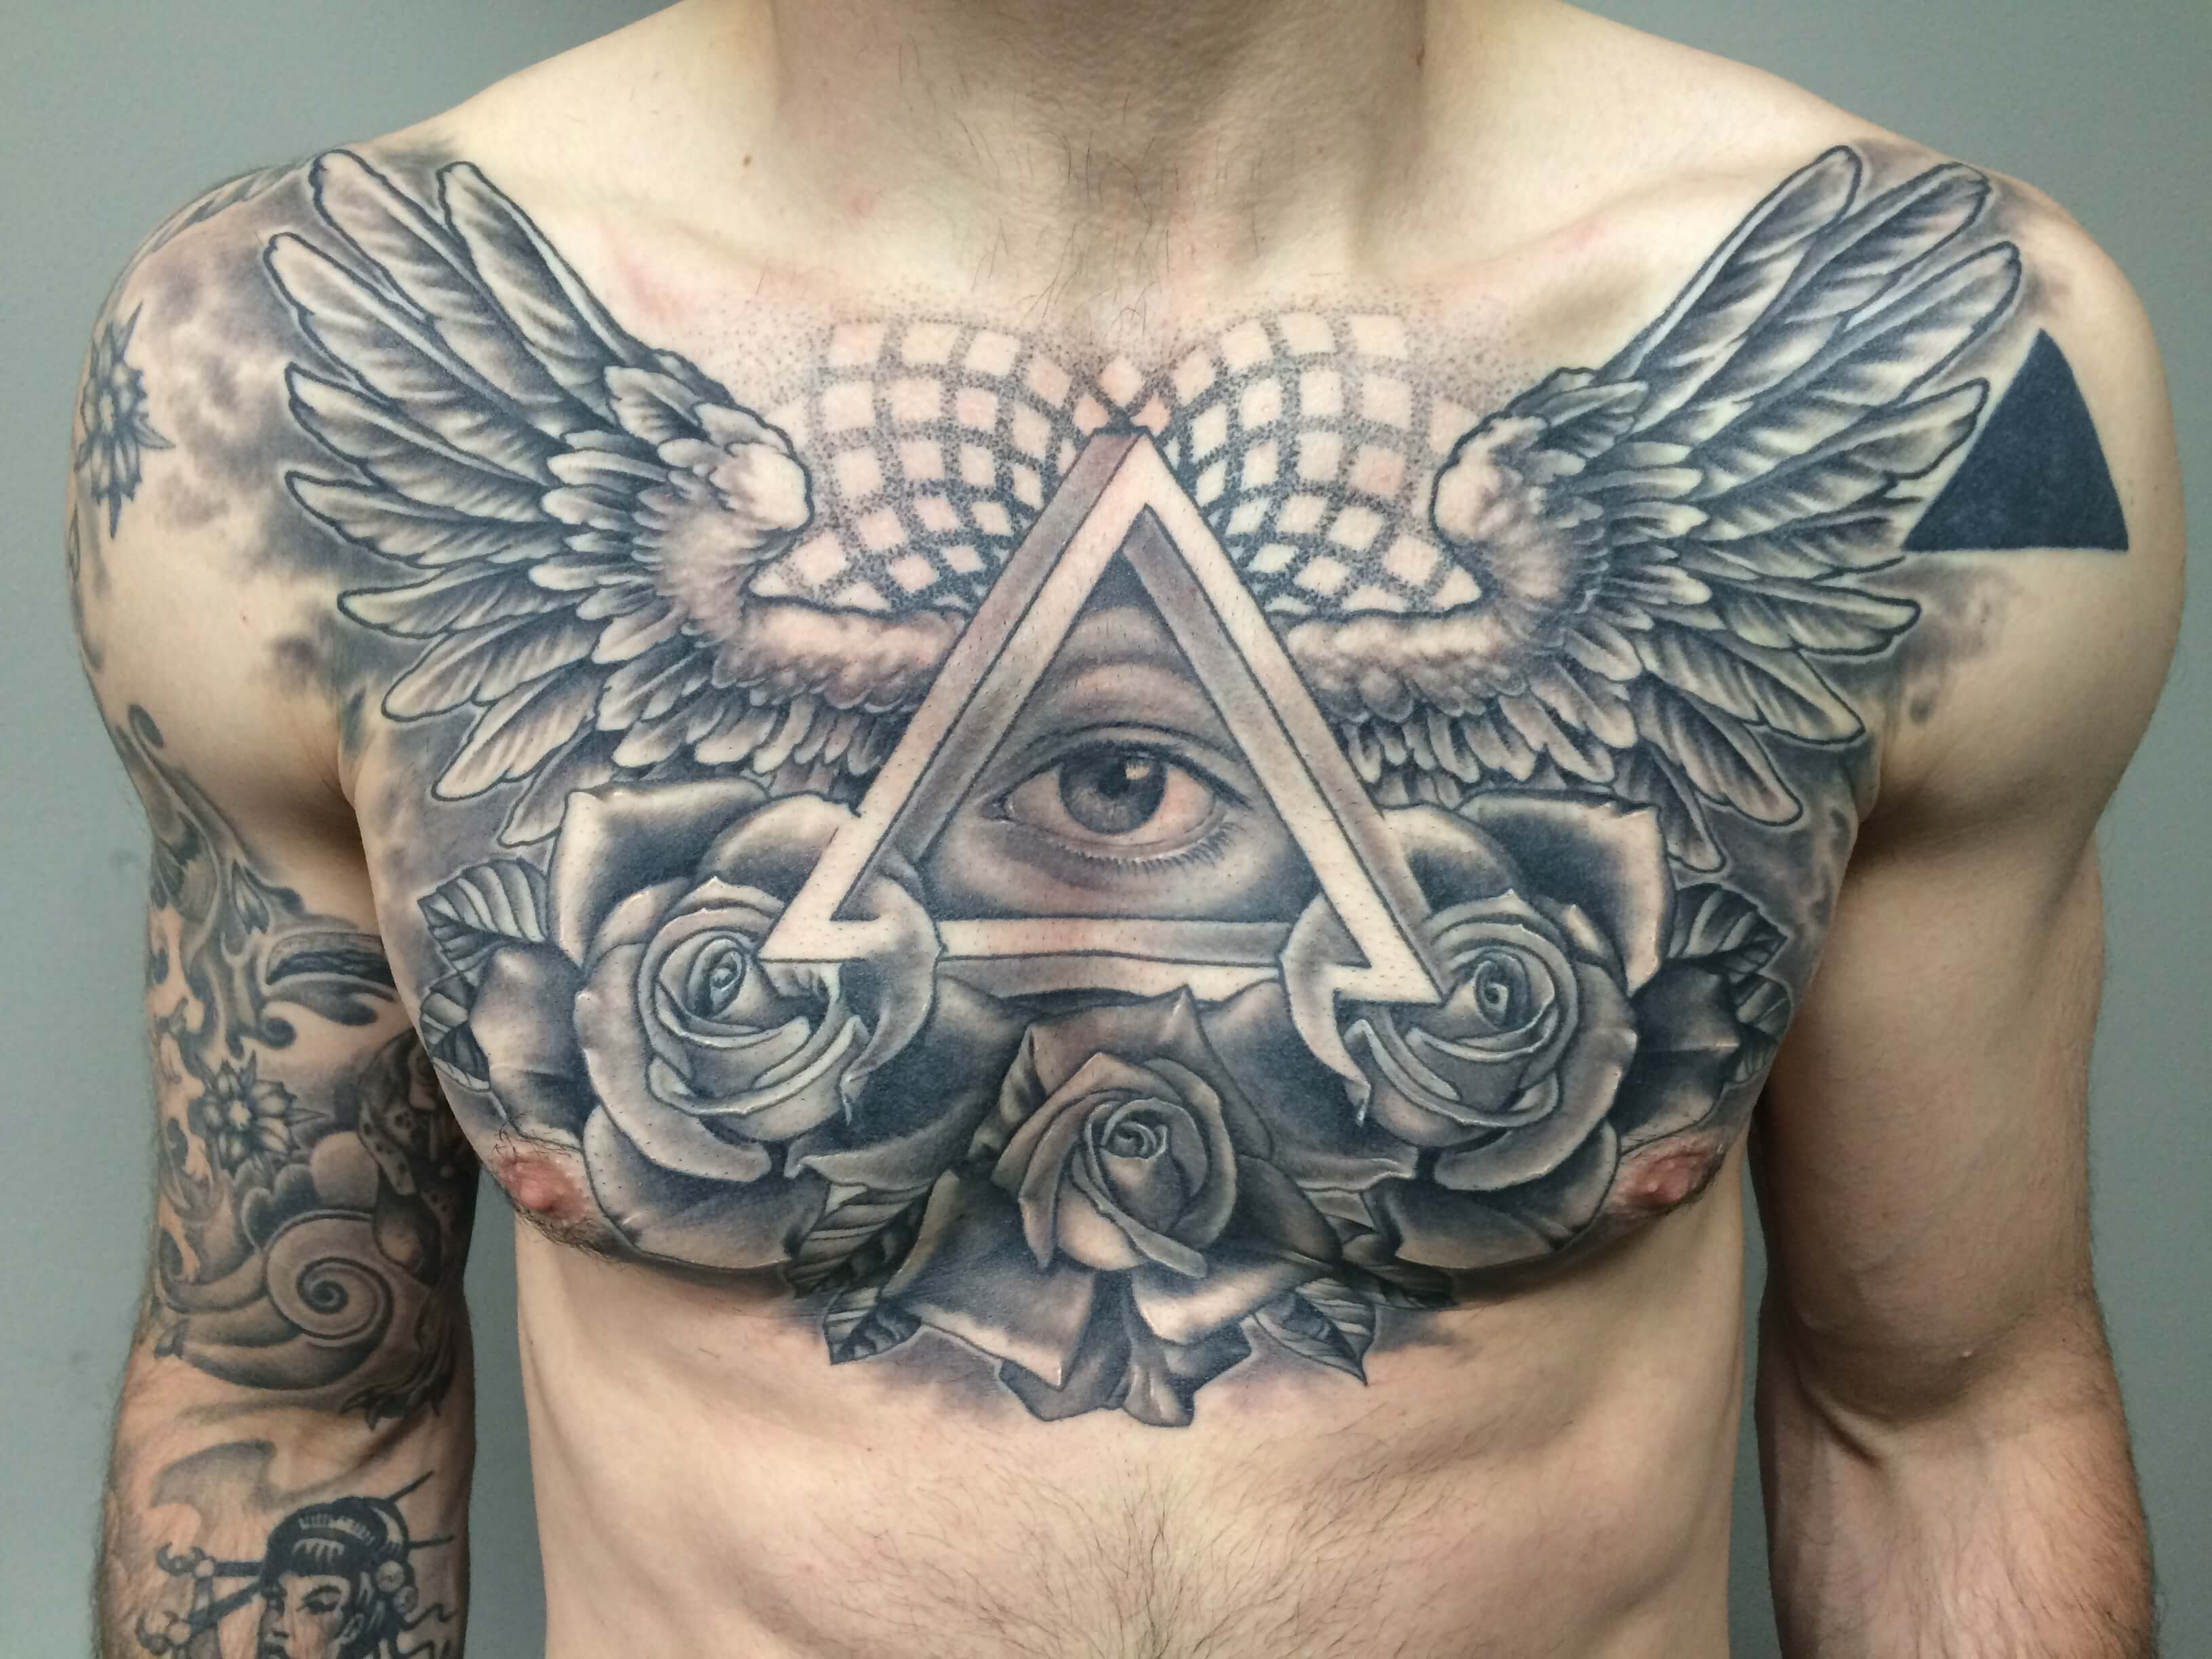 The 100 Best Chest Tattoos For Men Improb for dimensions 3264 X 2448